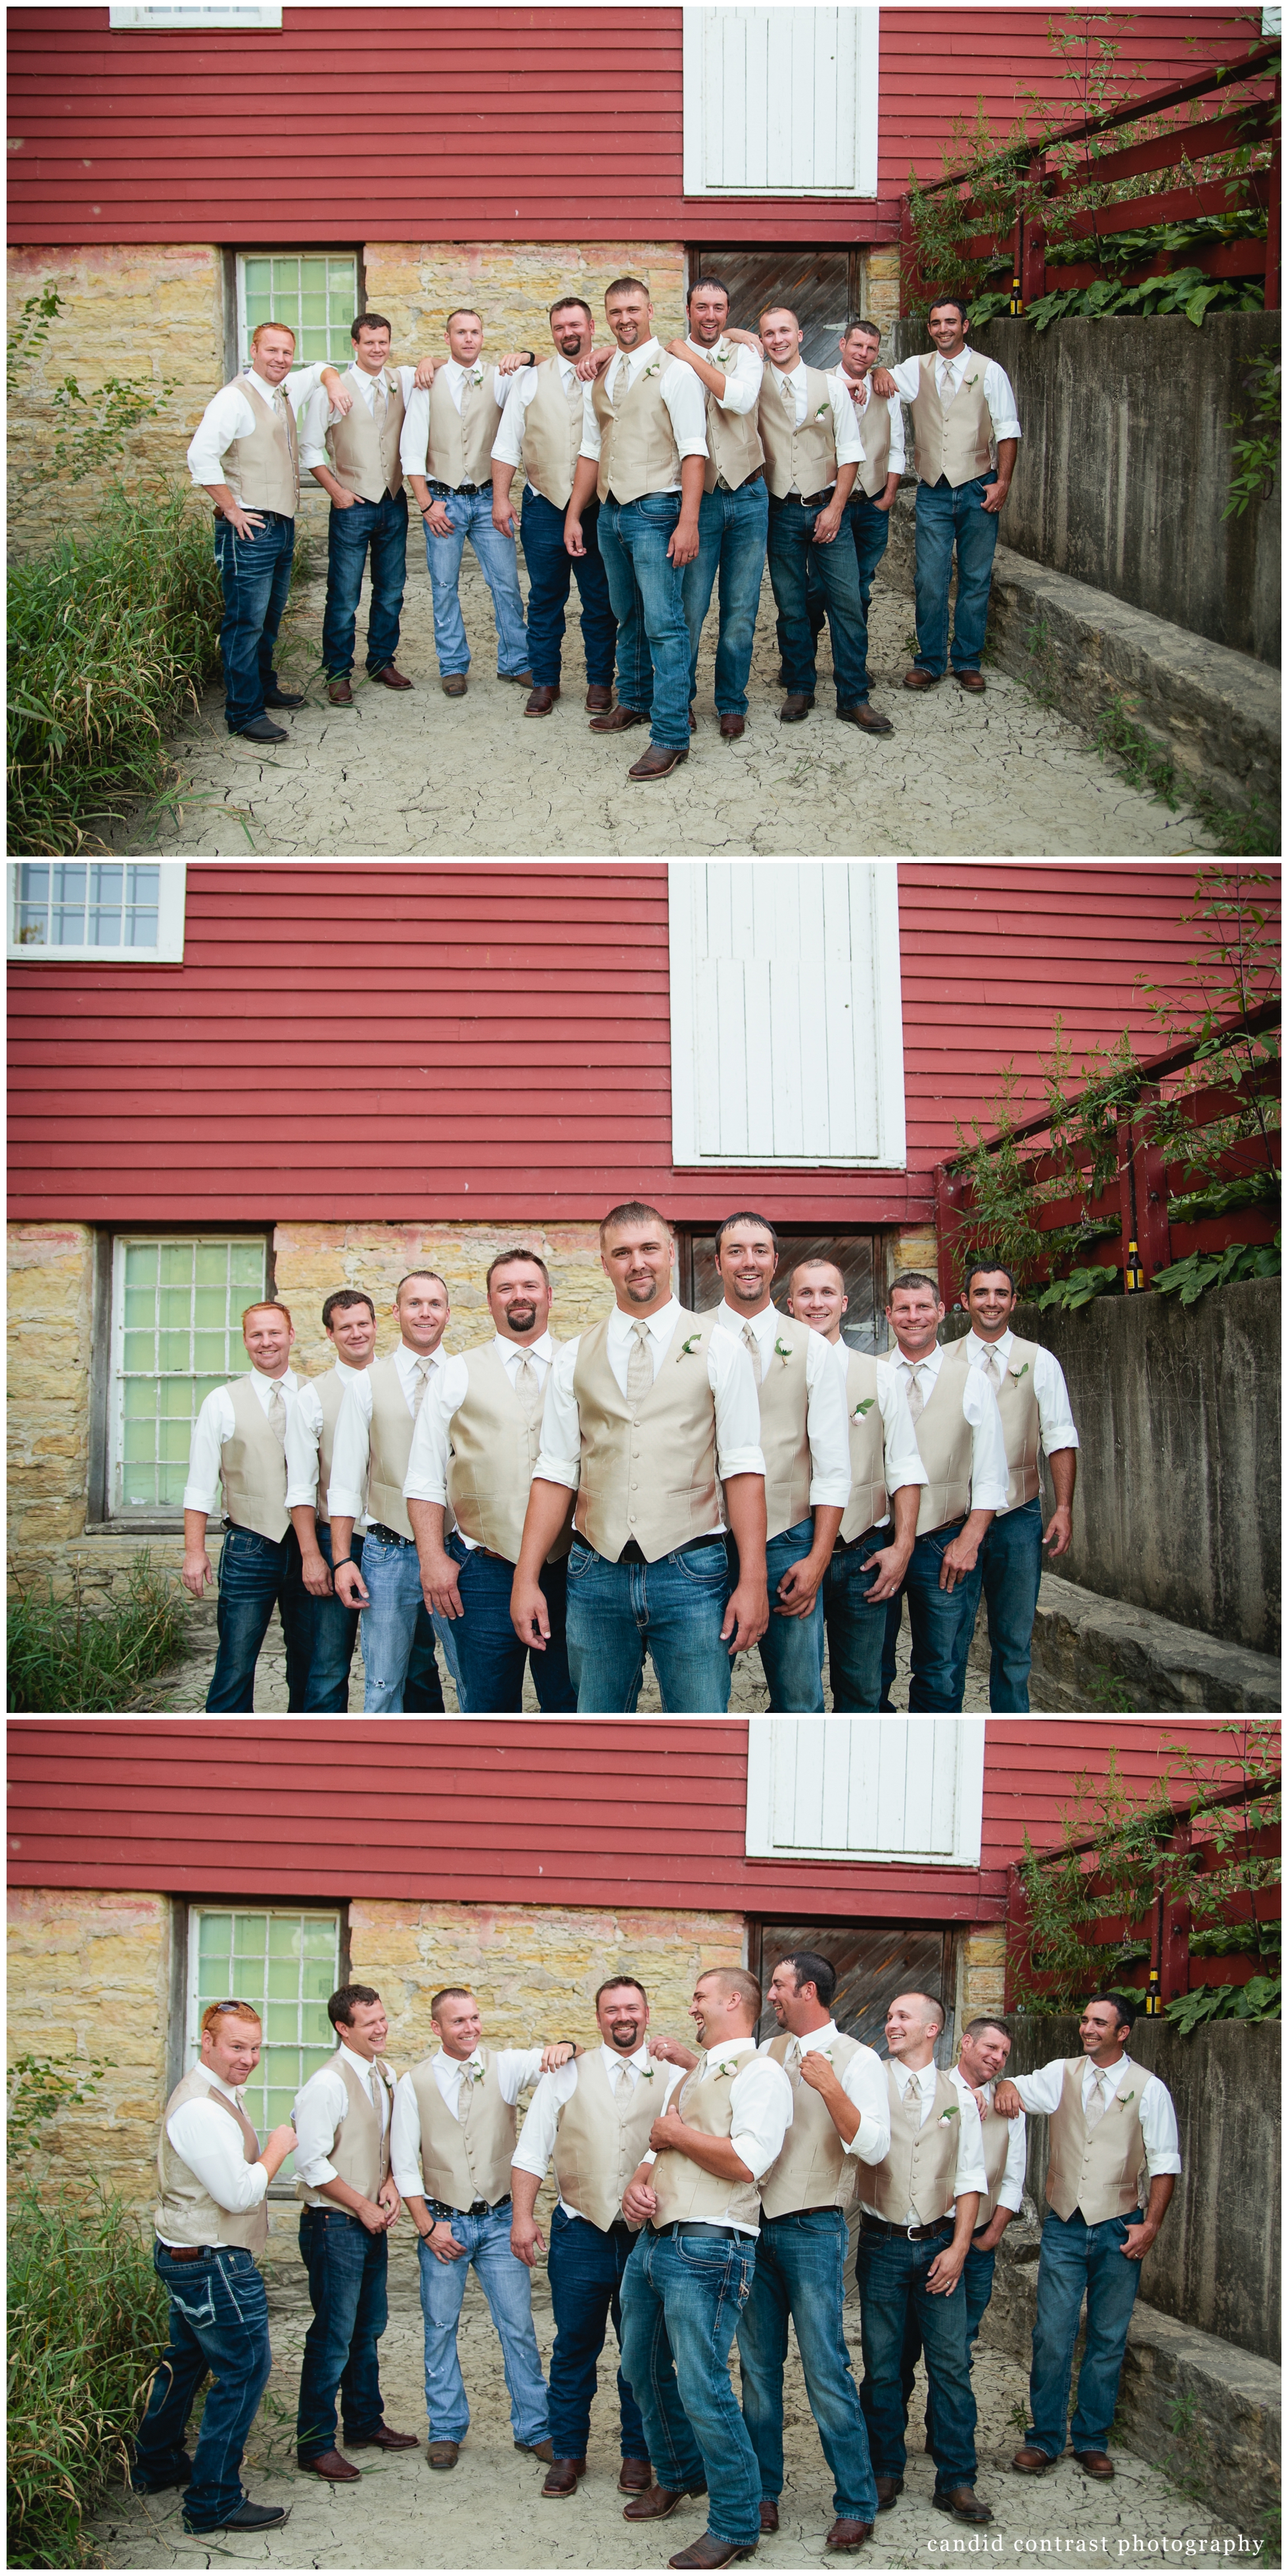 Bellevue Iowa wedding at The Shore Event Centre, groomsmen photos at potter's mill, iowa wedding photographer candid contrast photography